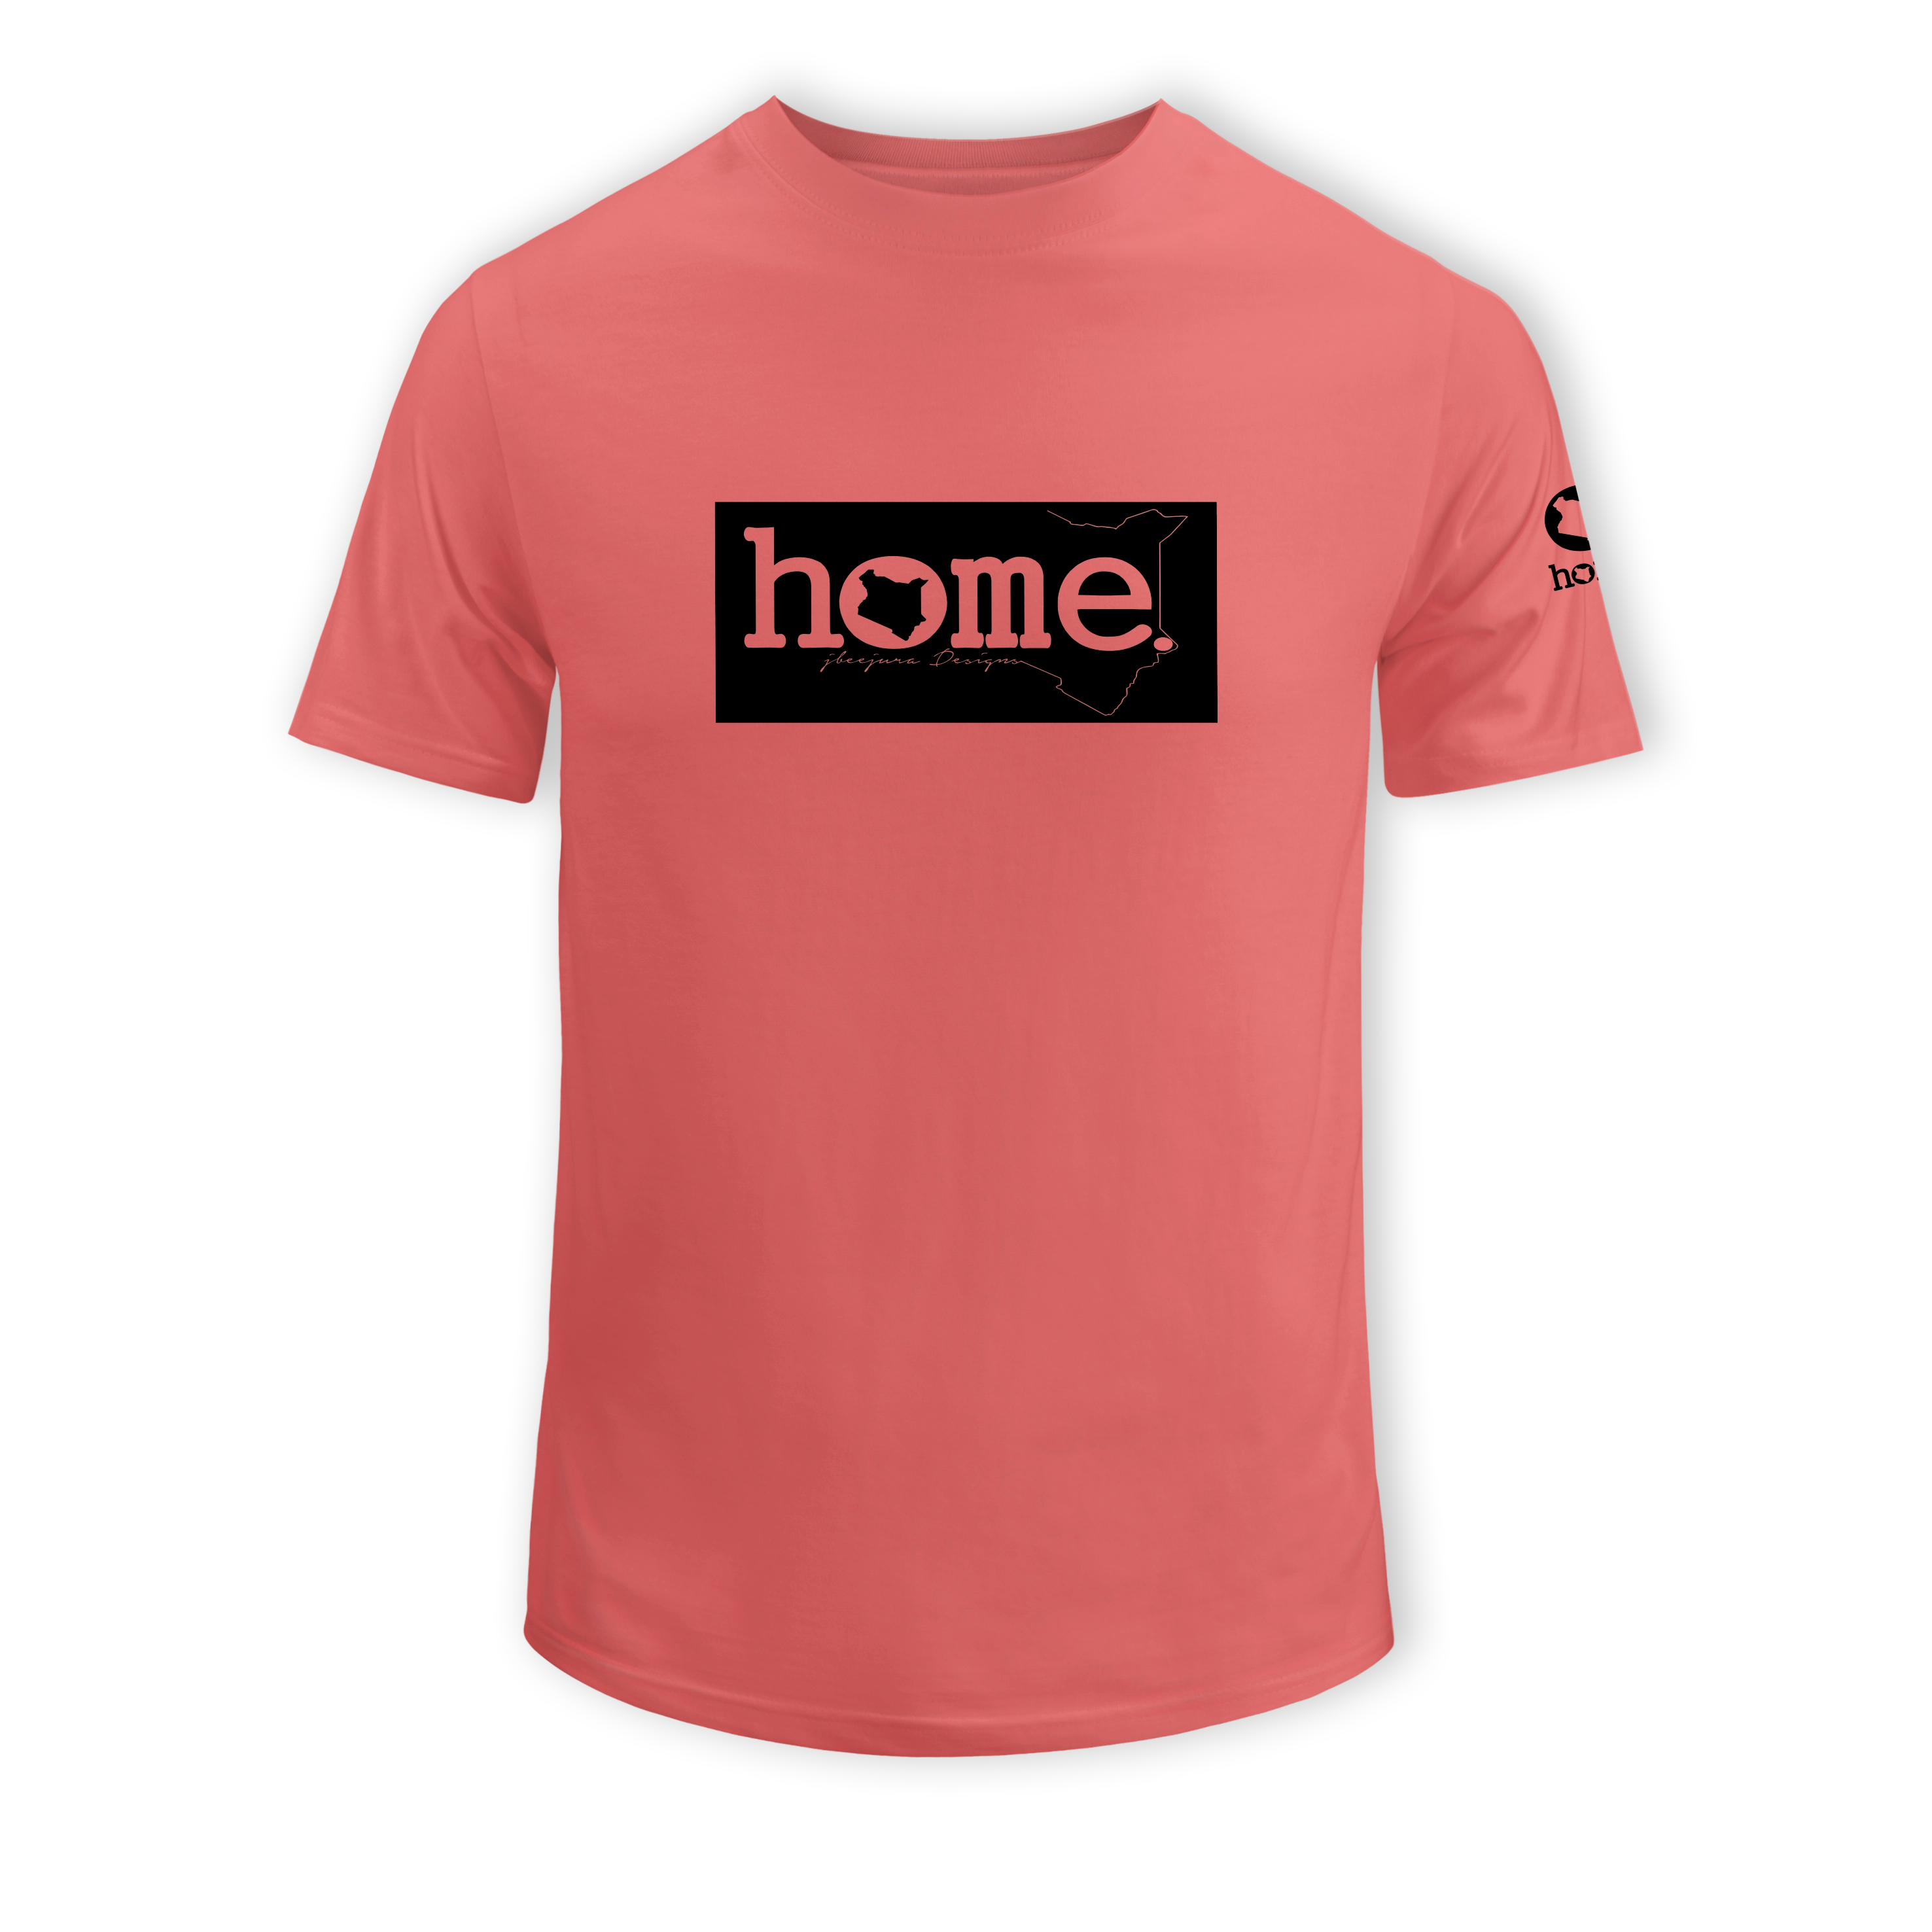 home_254 KIDS SHORT-SLEEVED MULBERRY T-SHIRT WITH A BLACK CLASSIC PRINT – COTTON PLUS FABRIC